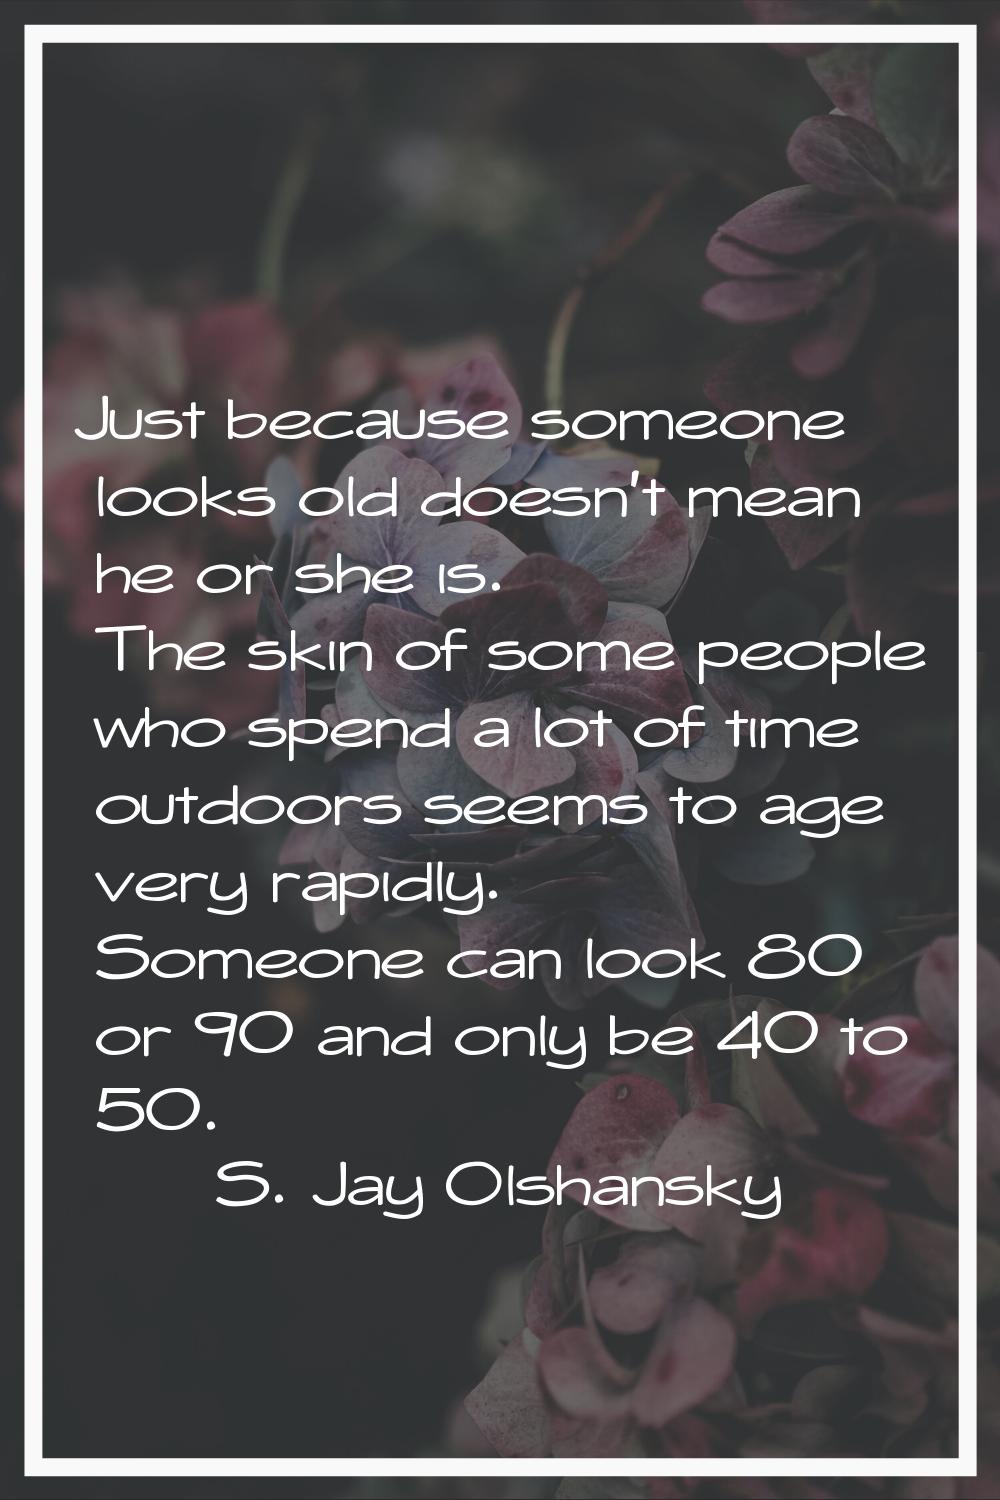 Just because someone looks old doesn't mean he or she is. The skin of some people who spend a lot o